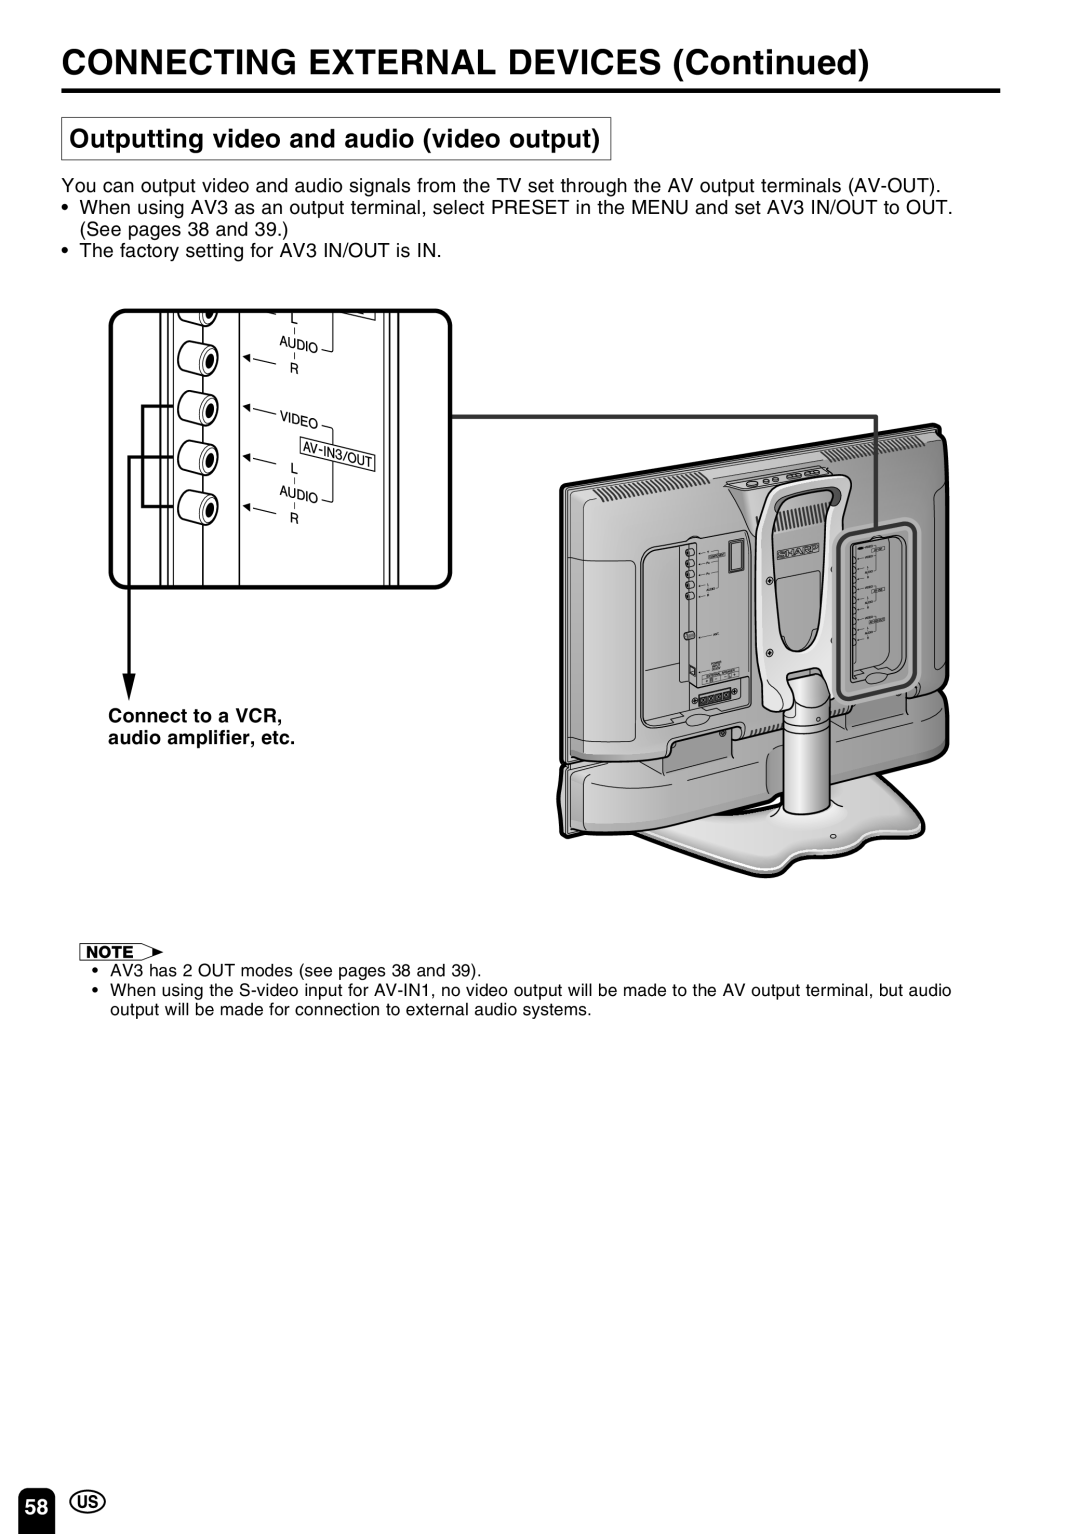 Sharp LC-22SV6U operation manual Outputting video and audio video output, CONNECTING EXTERNAL DEVICES Continued 